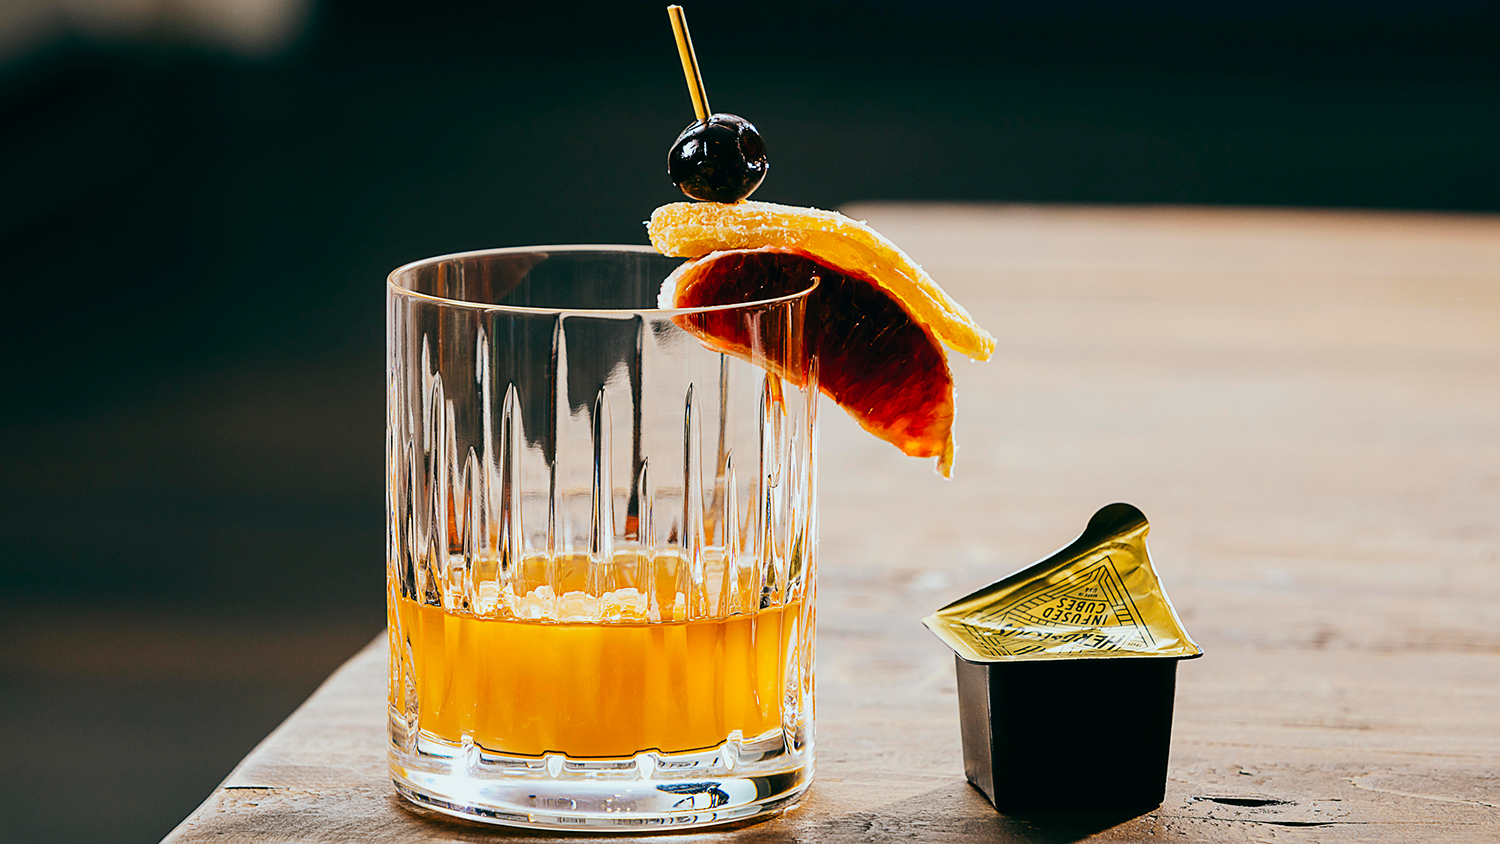 These 4 cocktails have ice cubes infused with booze and botanicals.